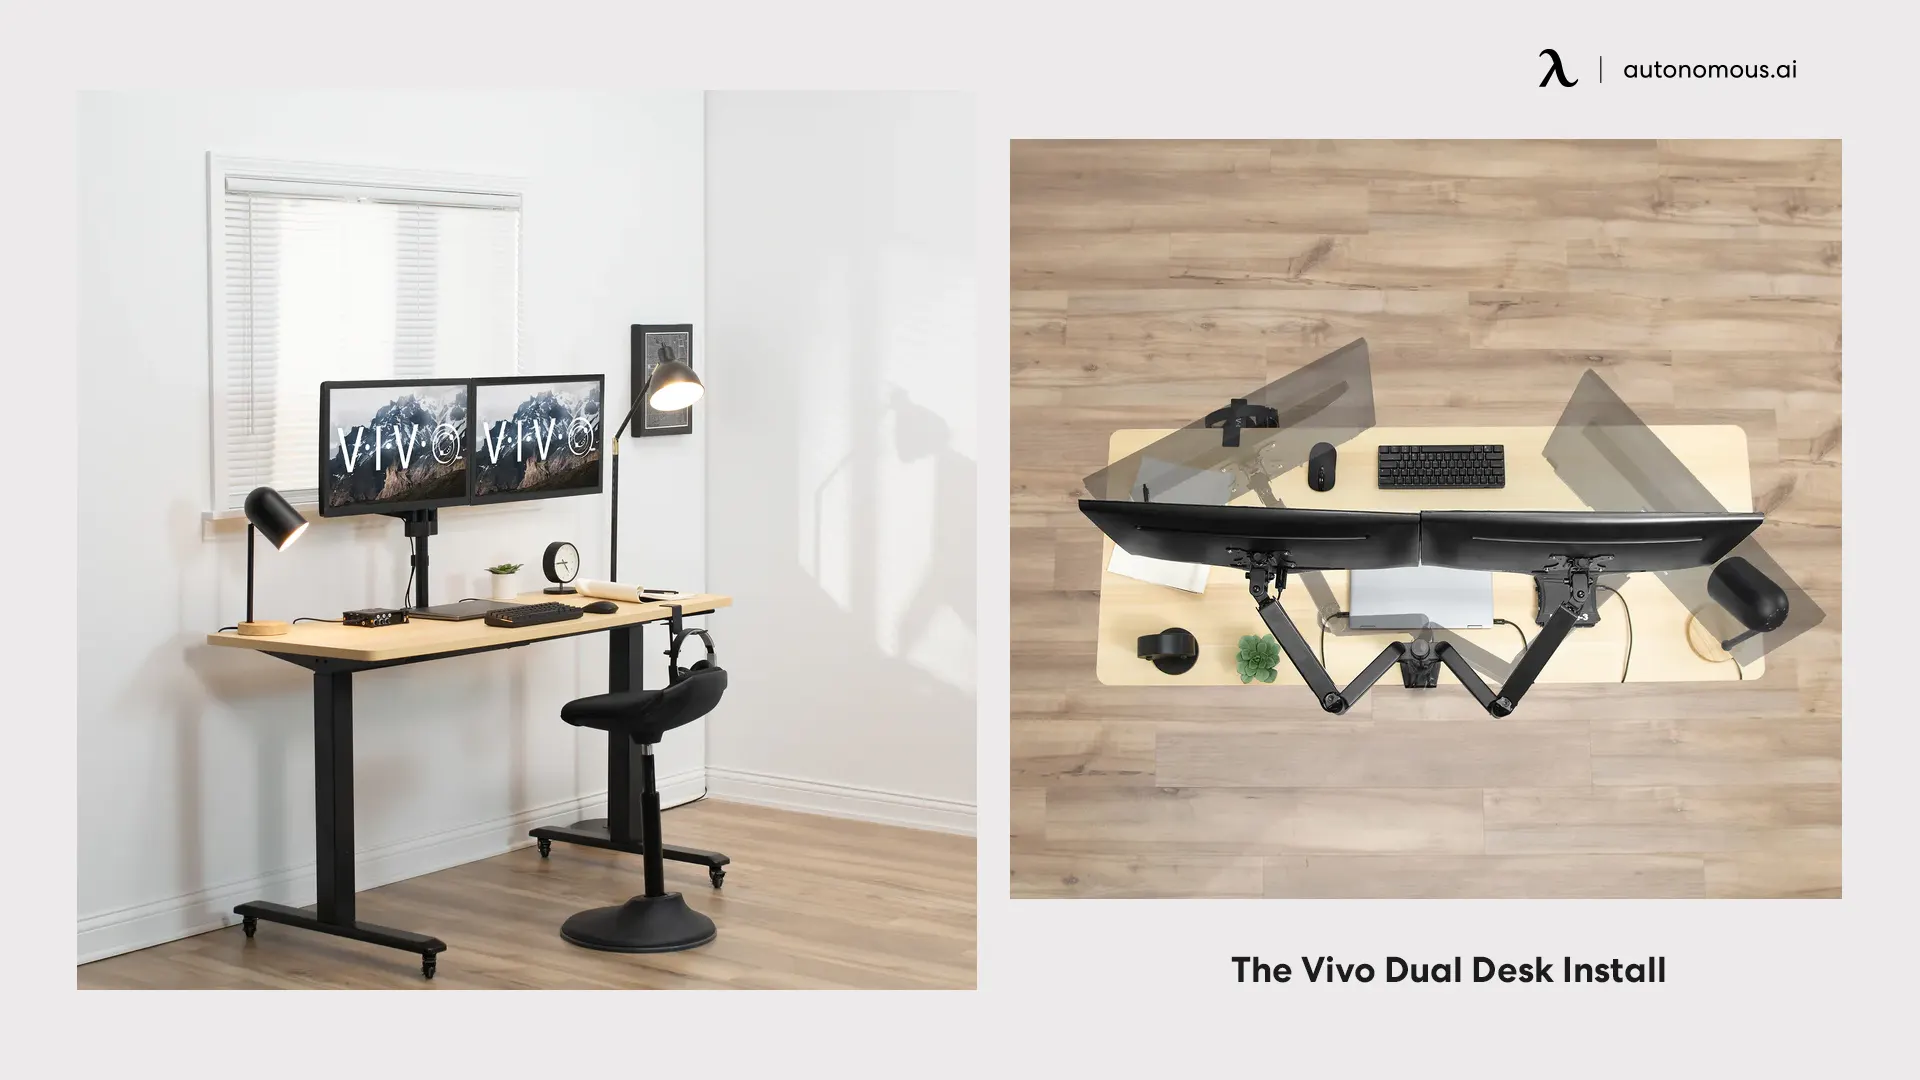 The Vivo Dual Desk Install Wooden monitor stand